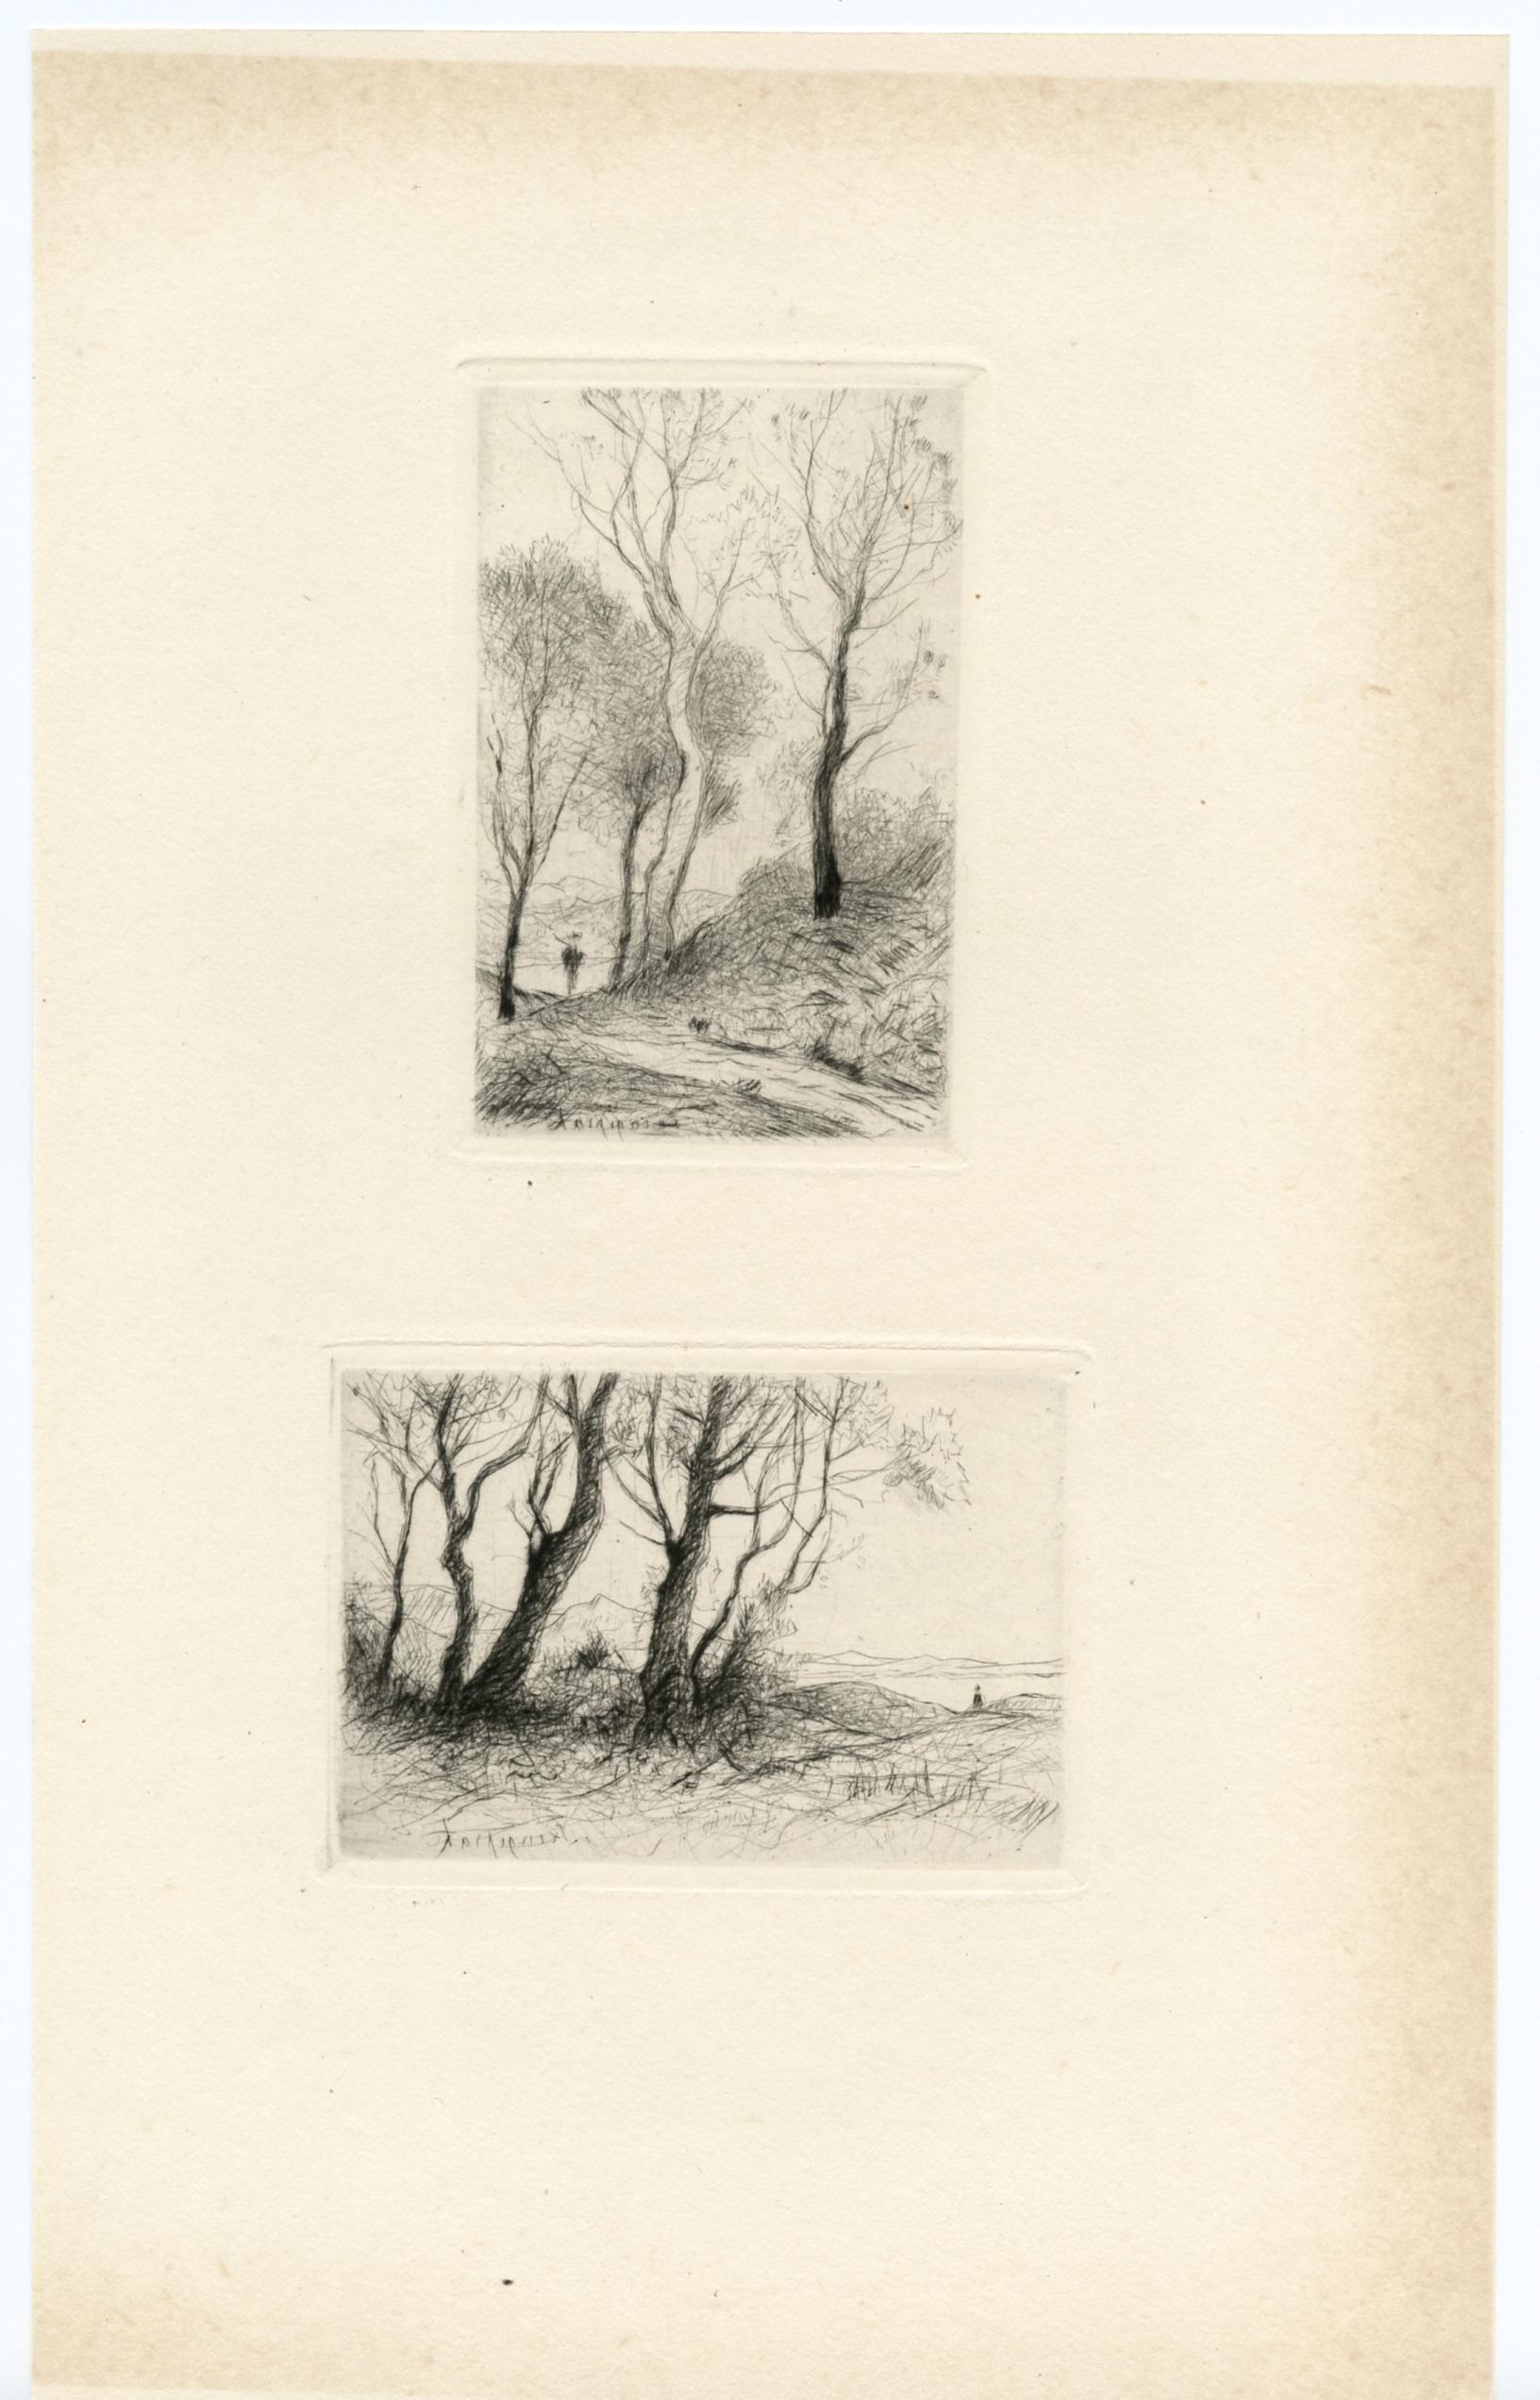 Medium: original etching and drypoint. This pair of drypoints was printed in Paris in 1917 and published by Gazette des Beaux Arts. Plate sizes: 3 1/2 x 2 1/4 inches (89 x 58 mm) and 2 1/4 x 3 3/8 inches (58 x 85 mm) on cream wove paper. Signed in